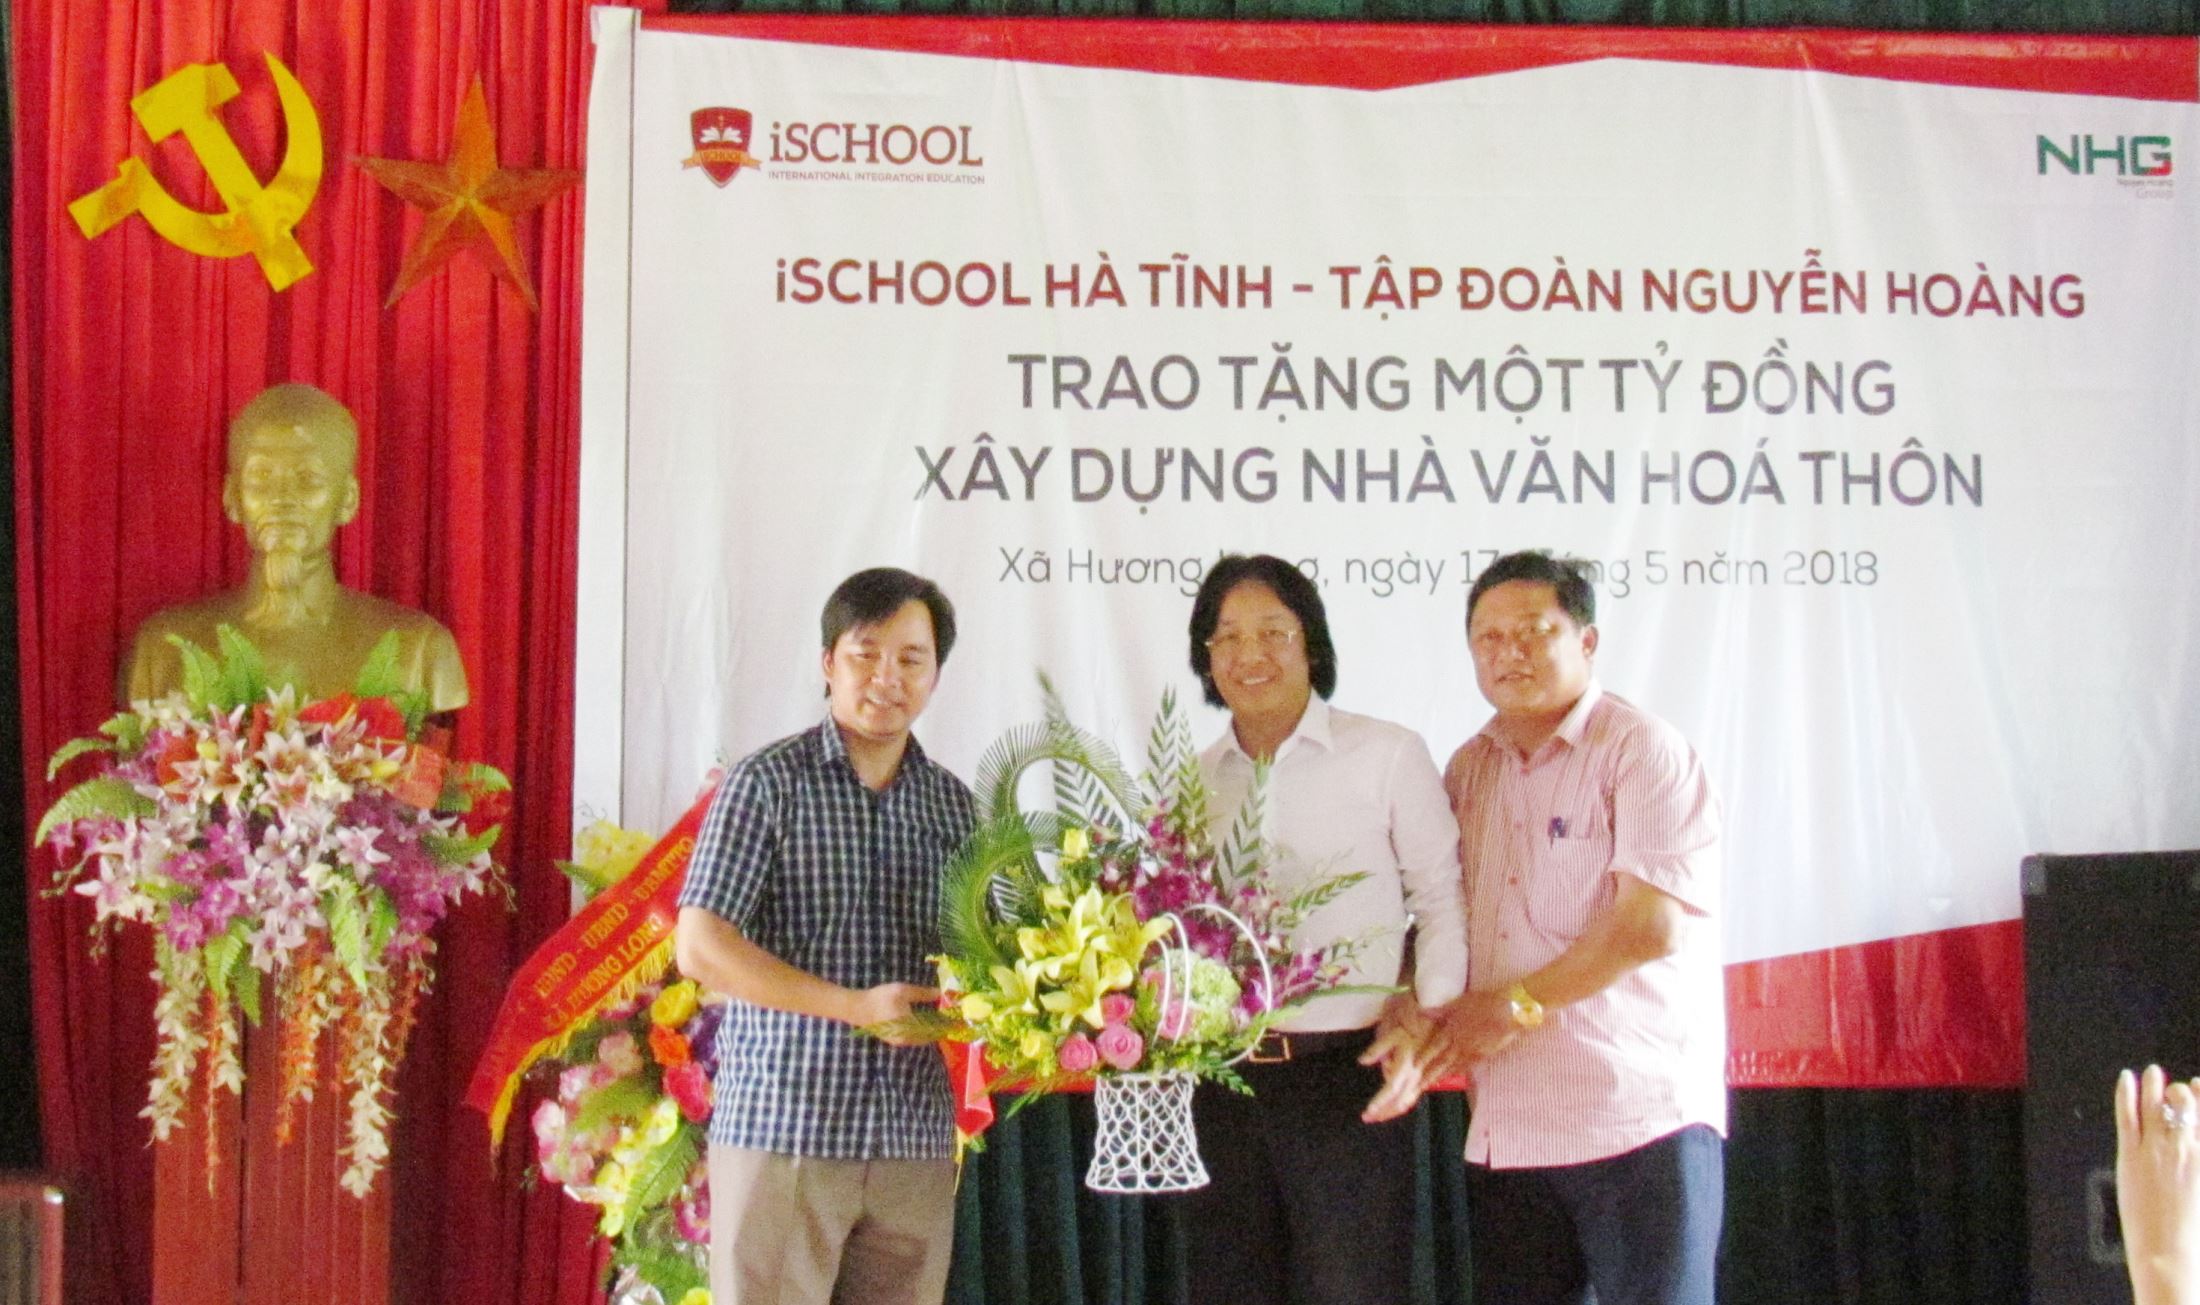 Mr. Hoang Quoc Viet received flowers from the leaders of Huong Long commune